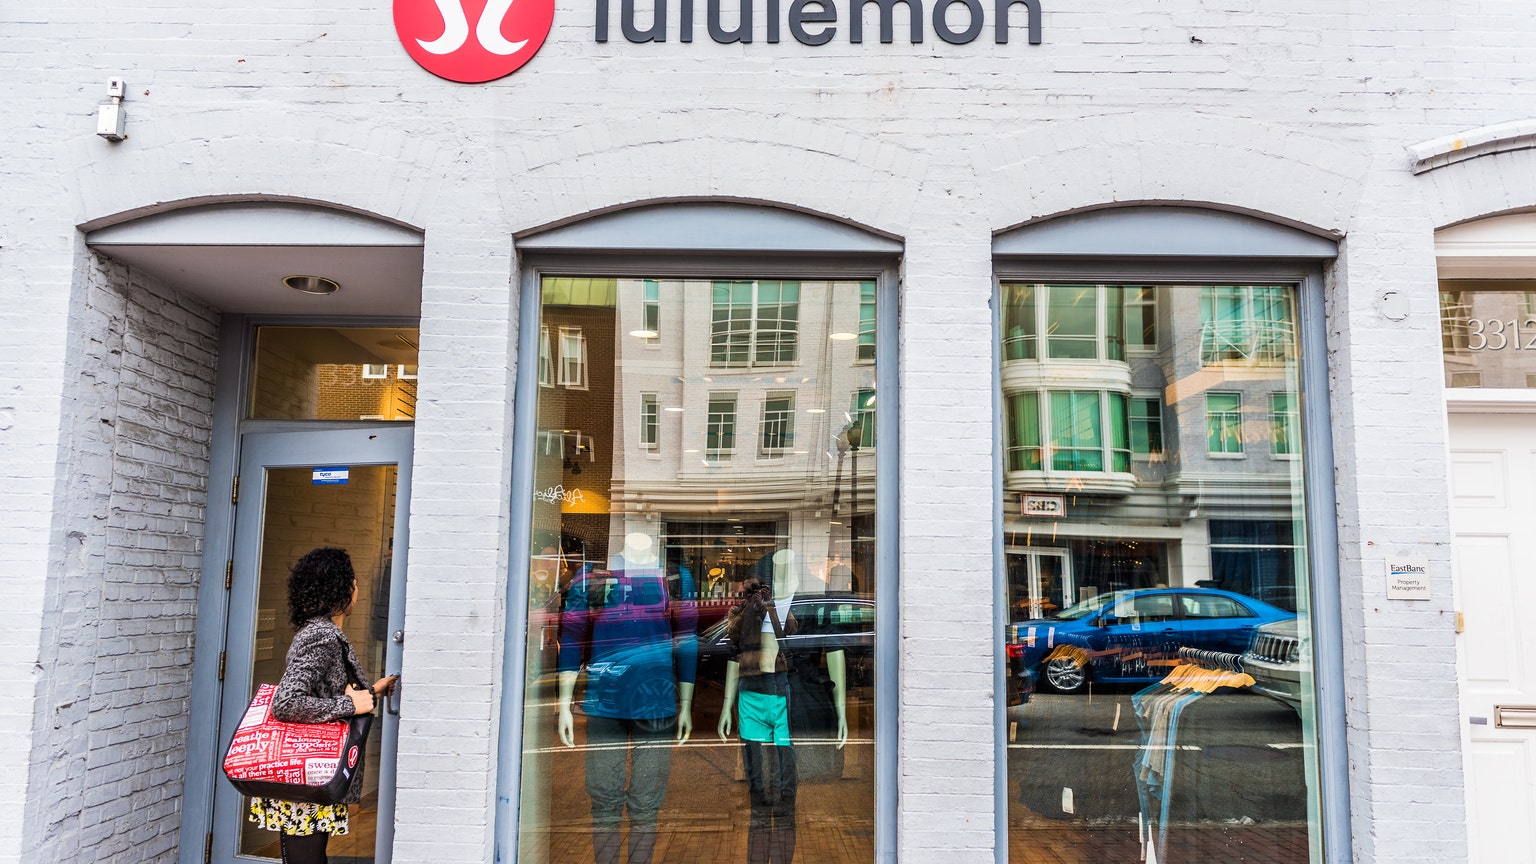 Lululemon Analysts Warn About Company's Over Saturation